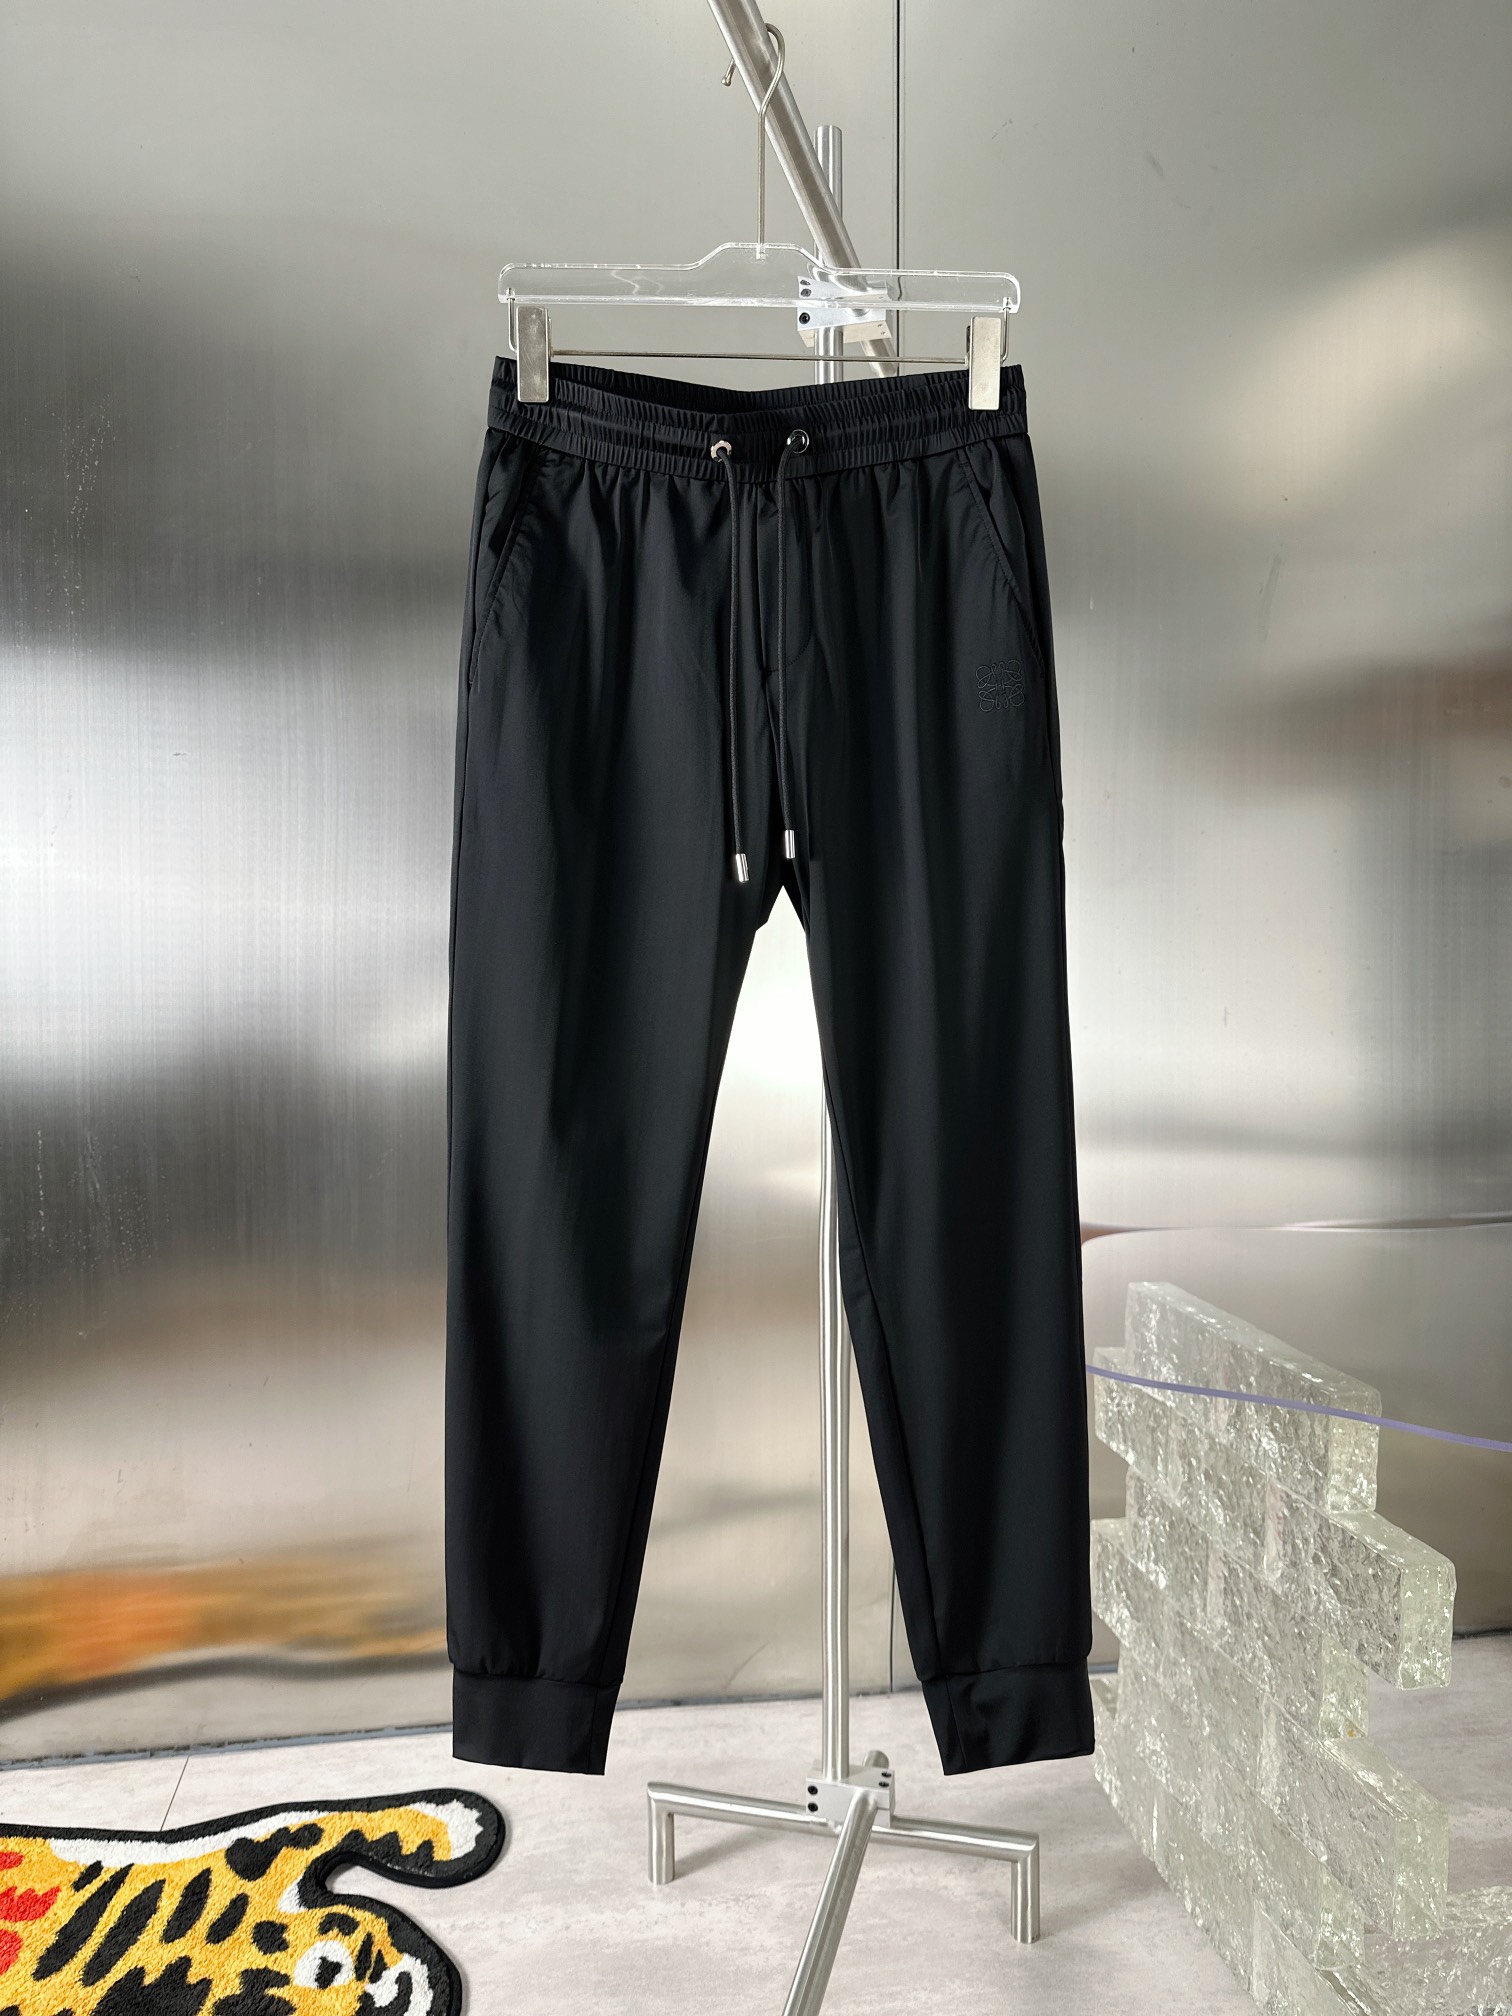 Loewe Clothing Pants & Trousers Black Blue Green Khaki Light Embroidery Spring/Summer Collection Casual